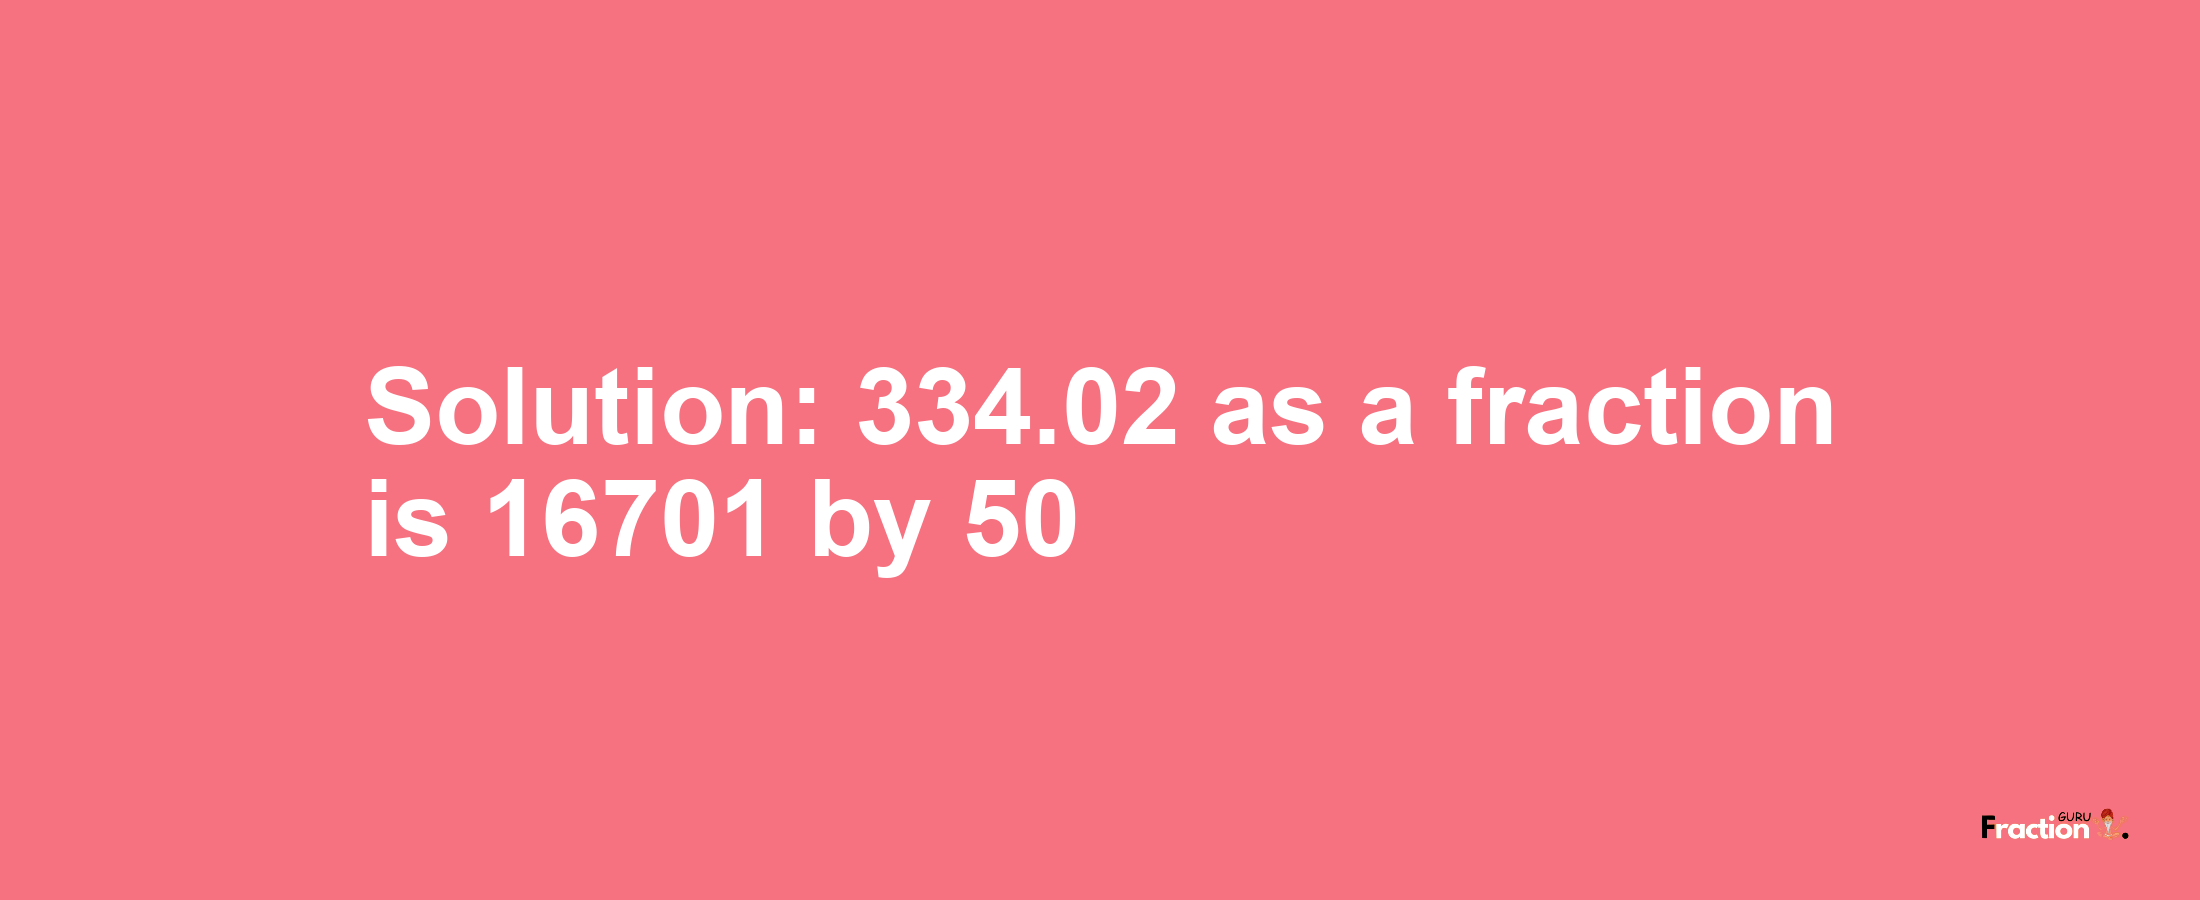 Solution:334.02 as a fraction is 16701/50